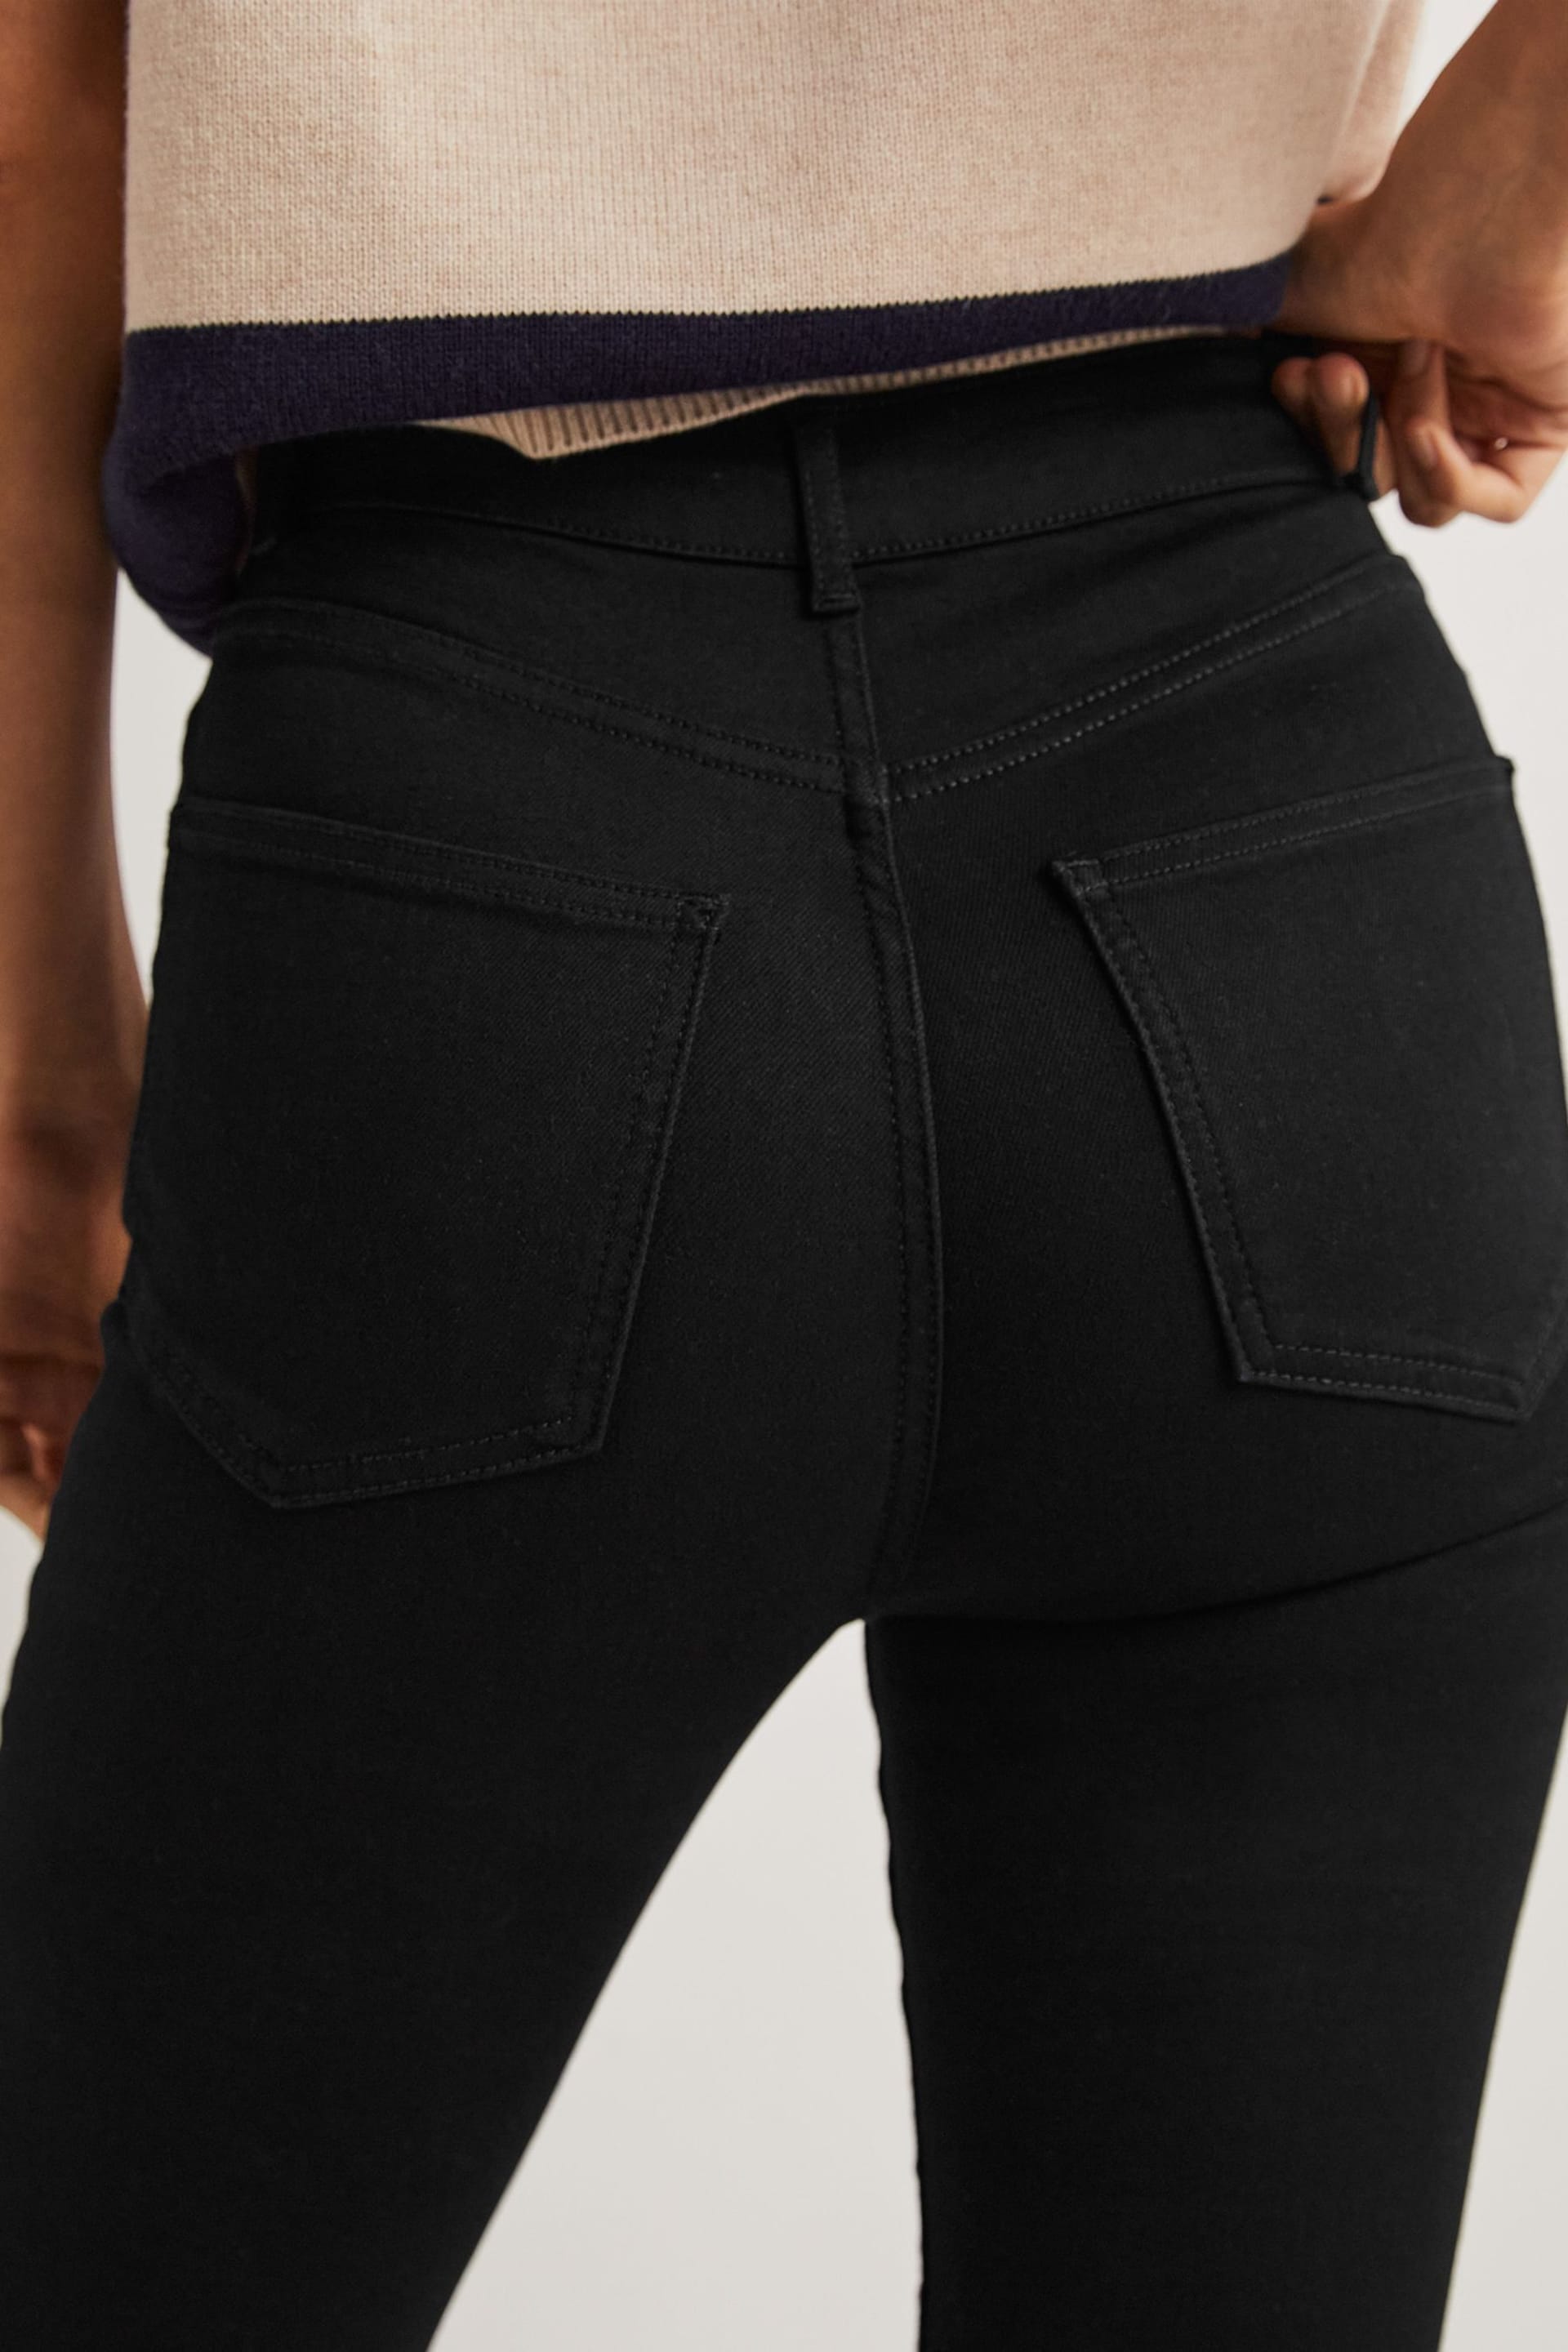 Boden Black Skinny Body Contour Jeans - Image 5 of 6